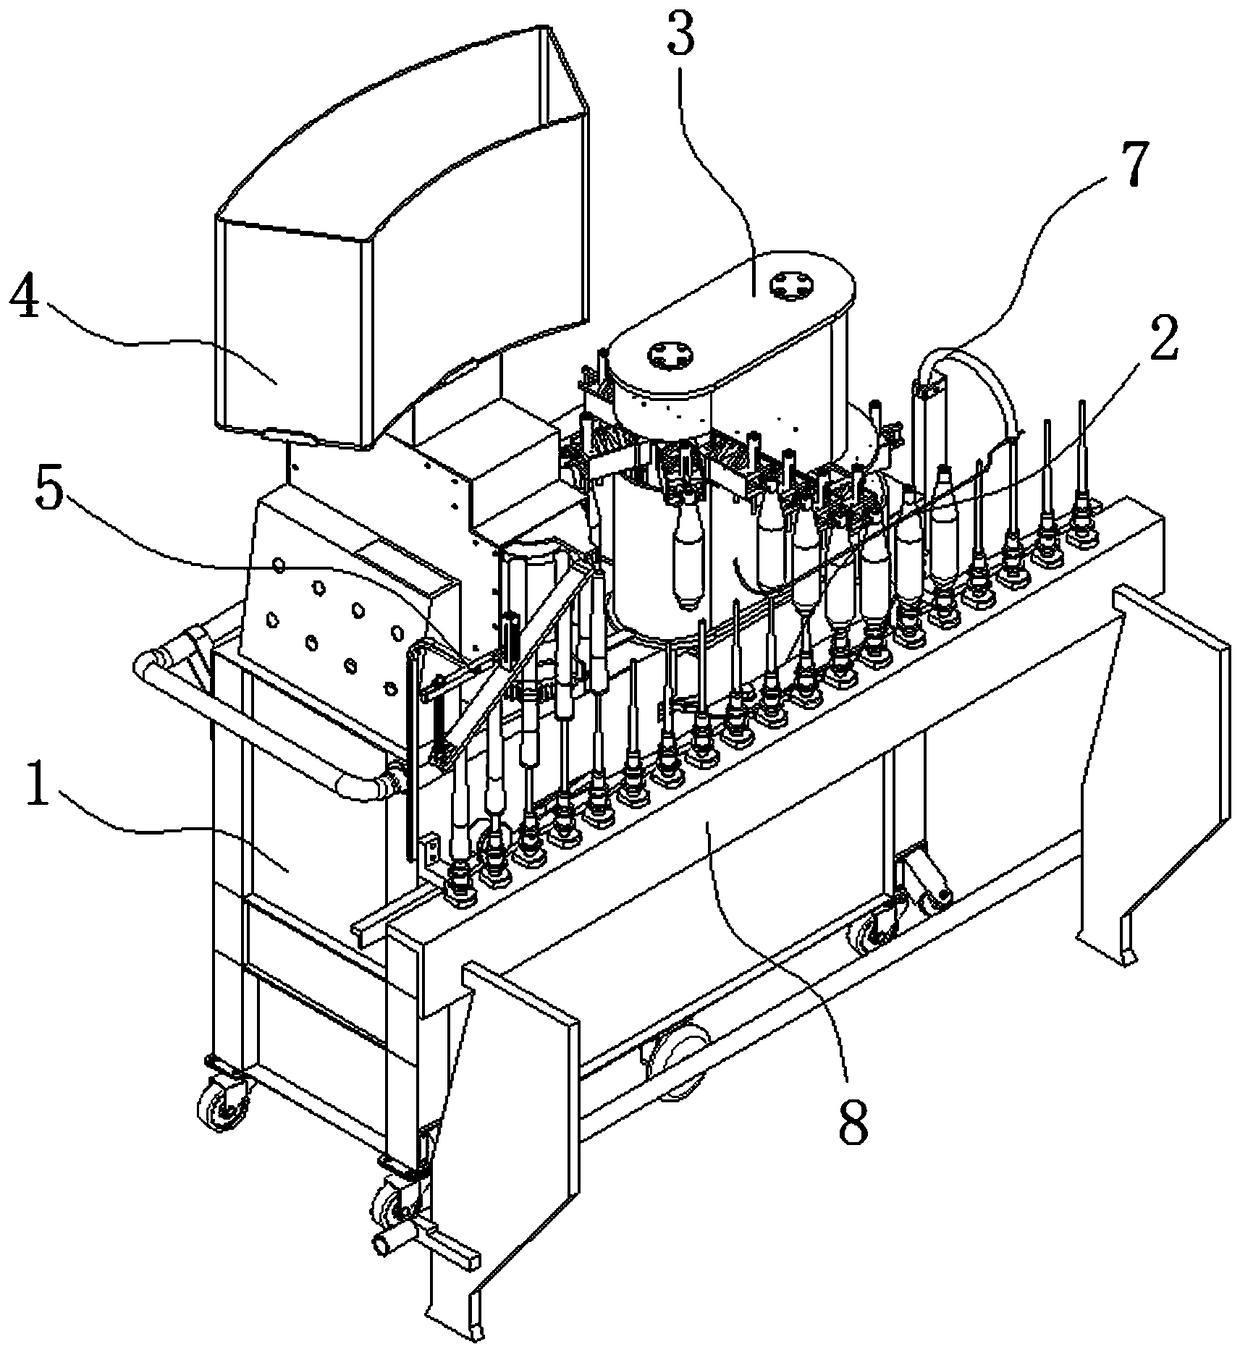 A mechanical arm device for worsted spinning doffing machine